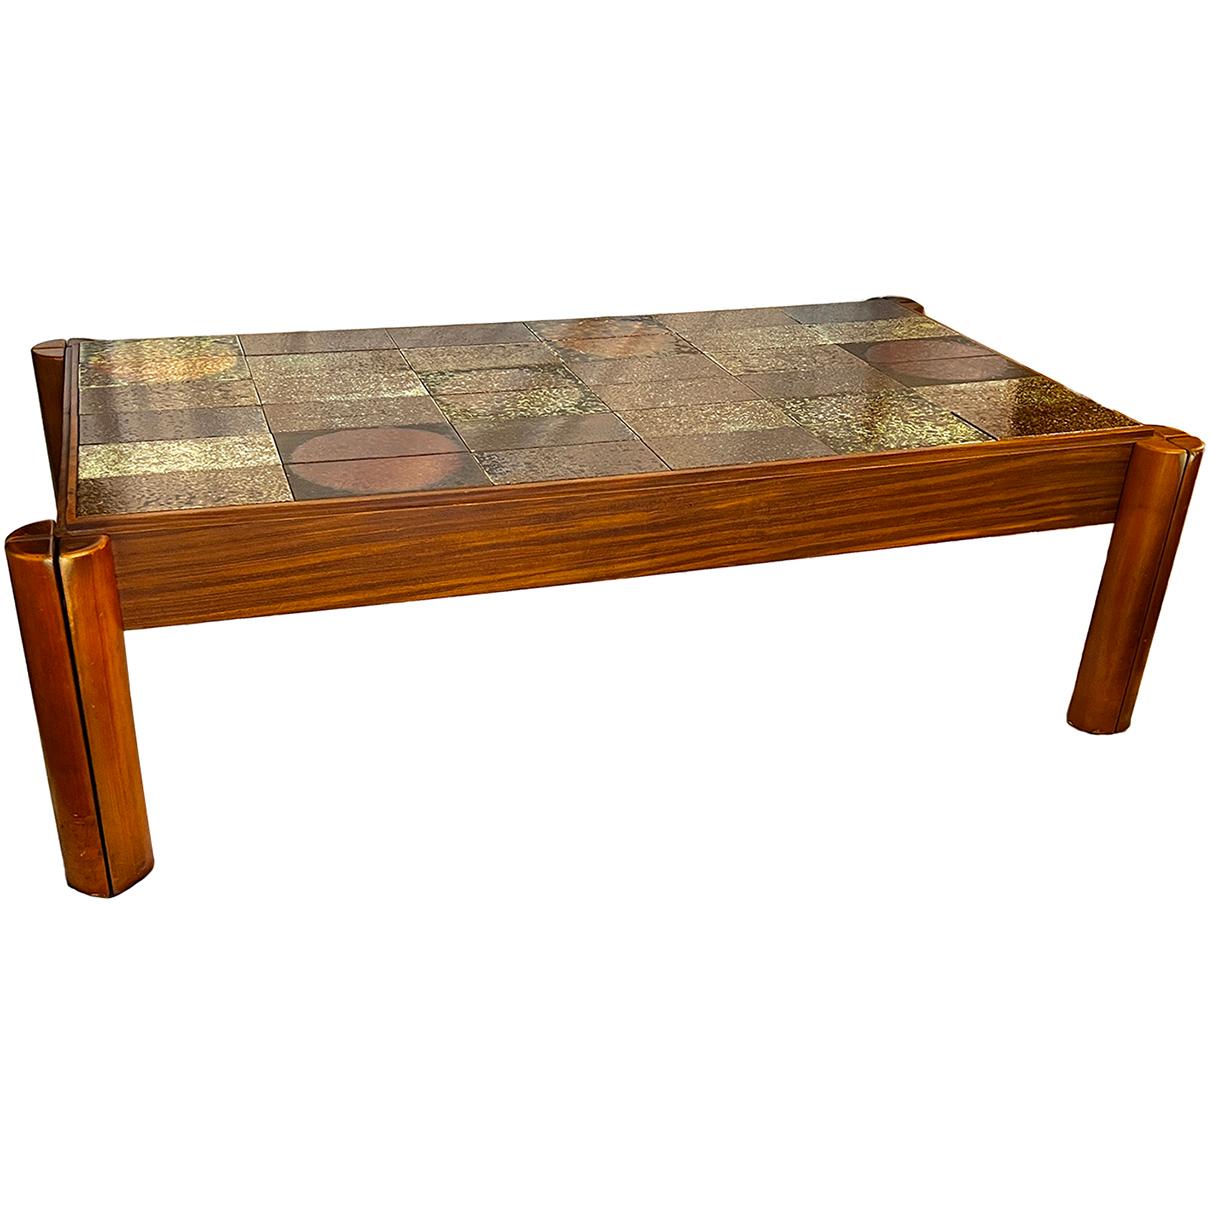 A circa 1960's Danish tile top table with wooden base.

Measurements:
Height: 16